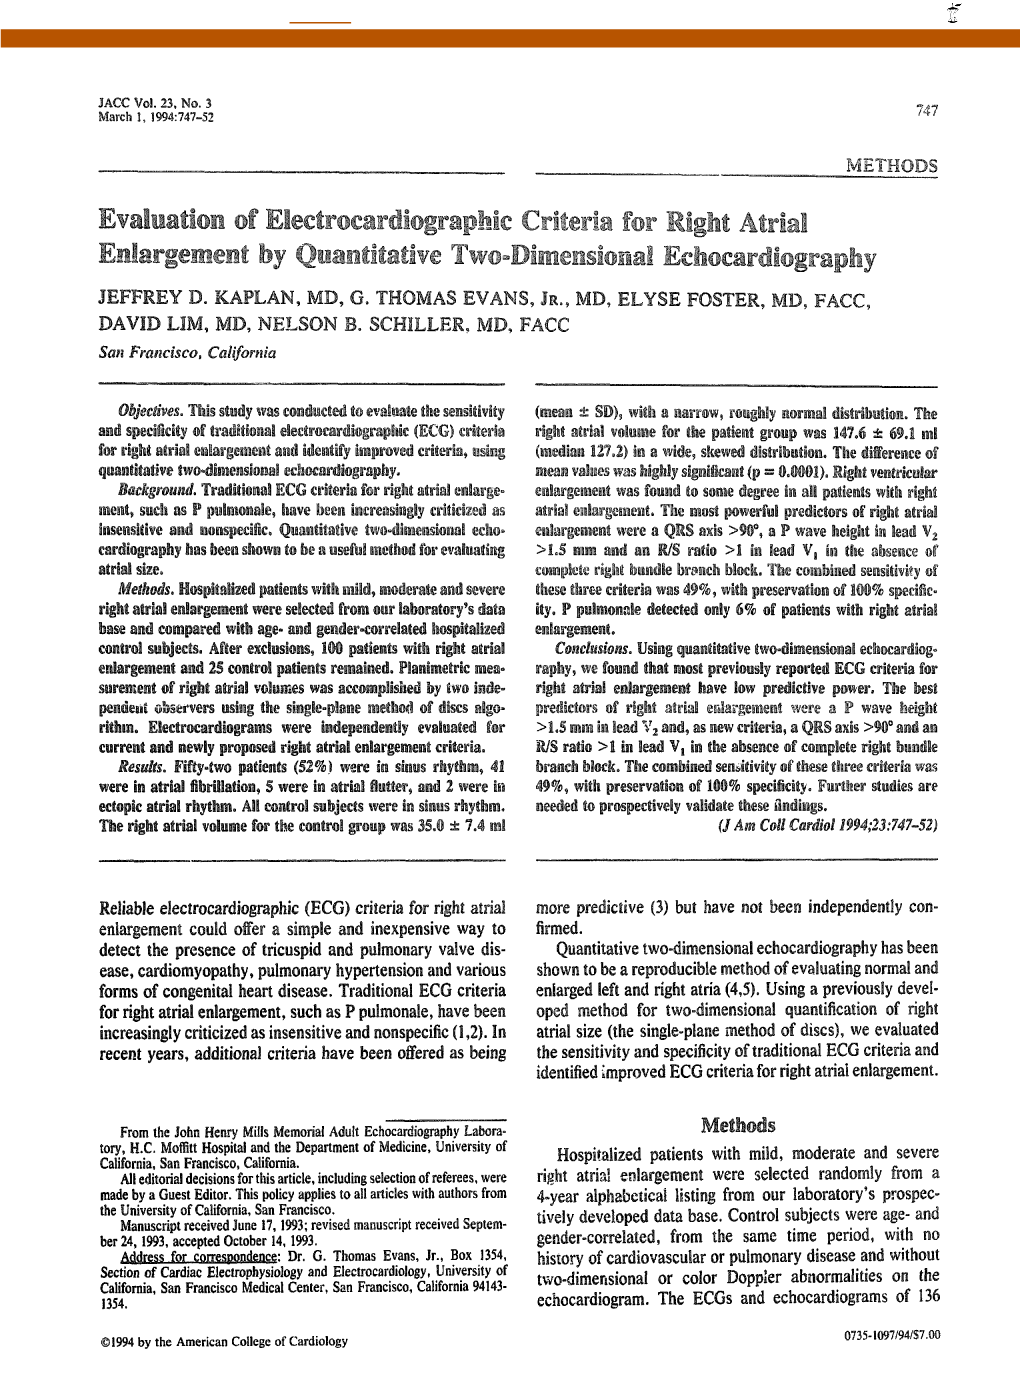 Evaluation of Electrocardiographic Criteria for Right Atrial Enlargement